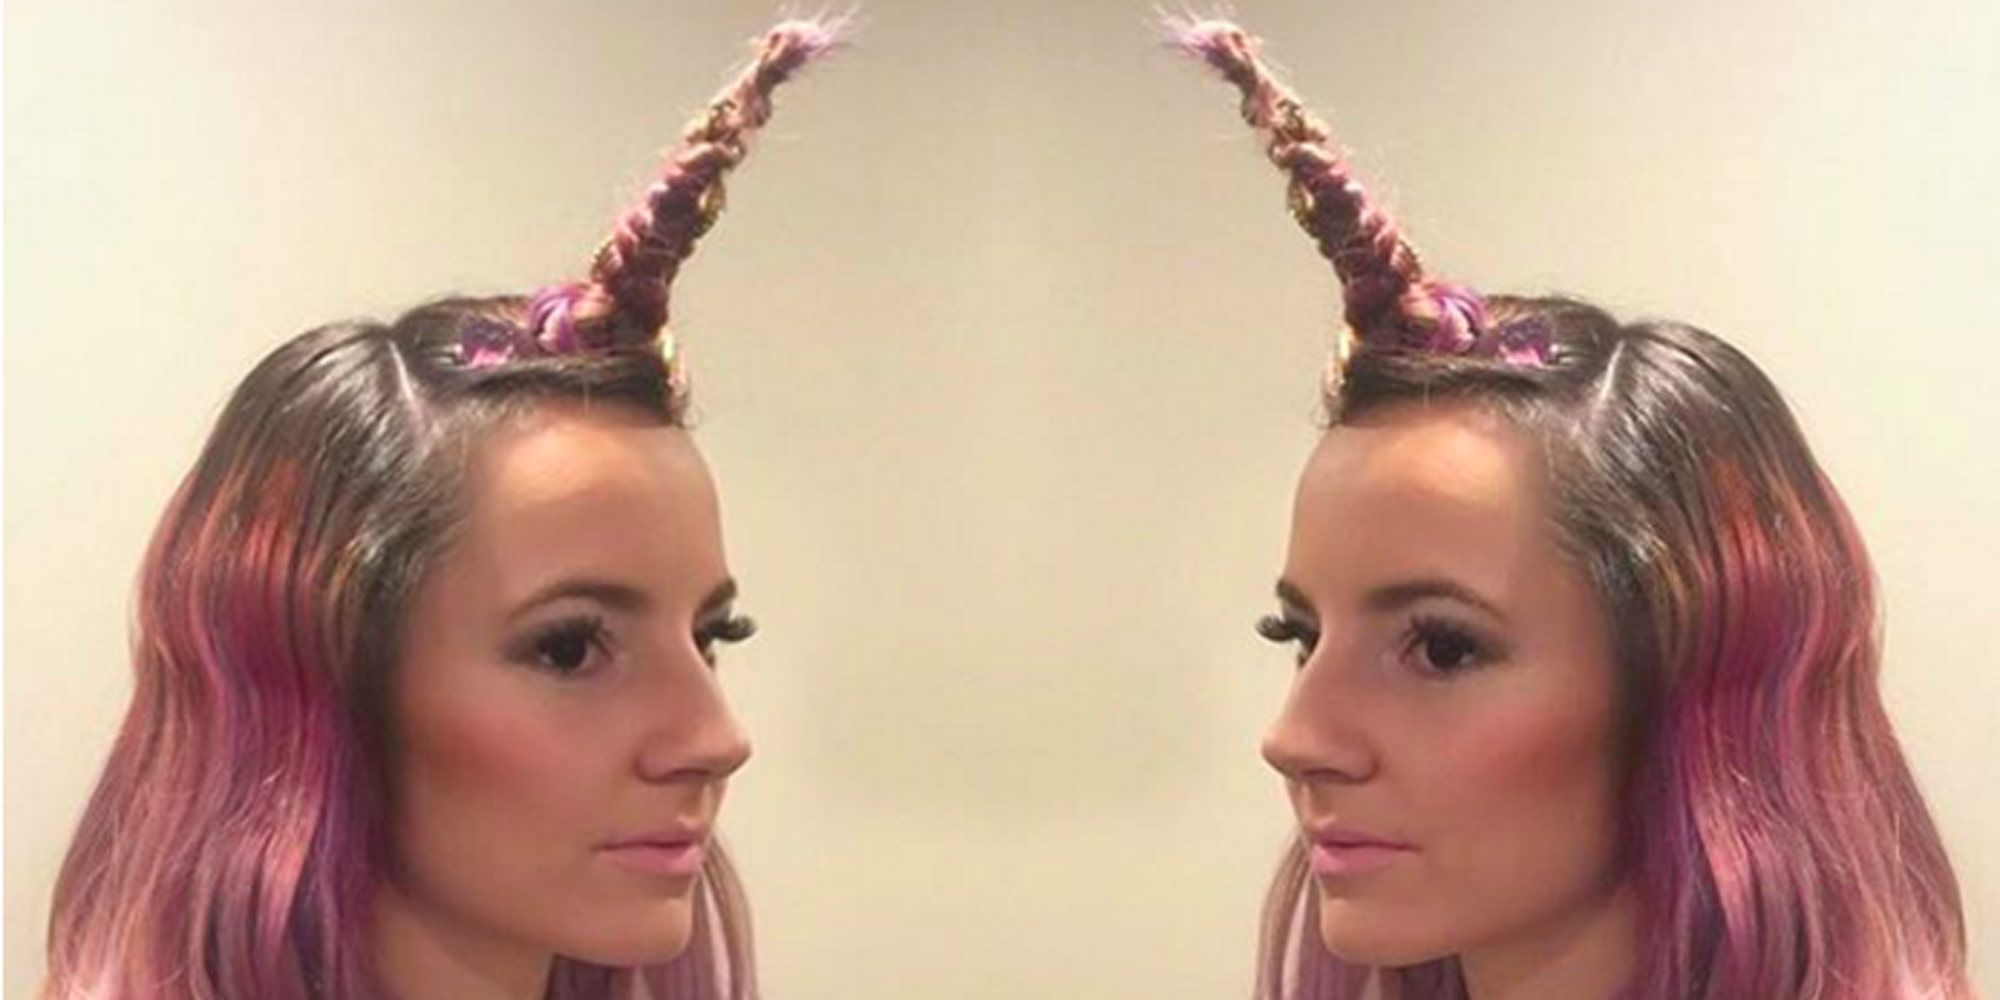 Unicorn Horns Are the Next Crazy Braid Trend and They're Strangely Magical